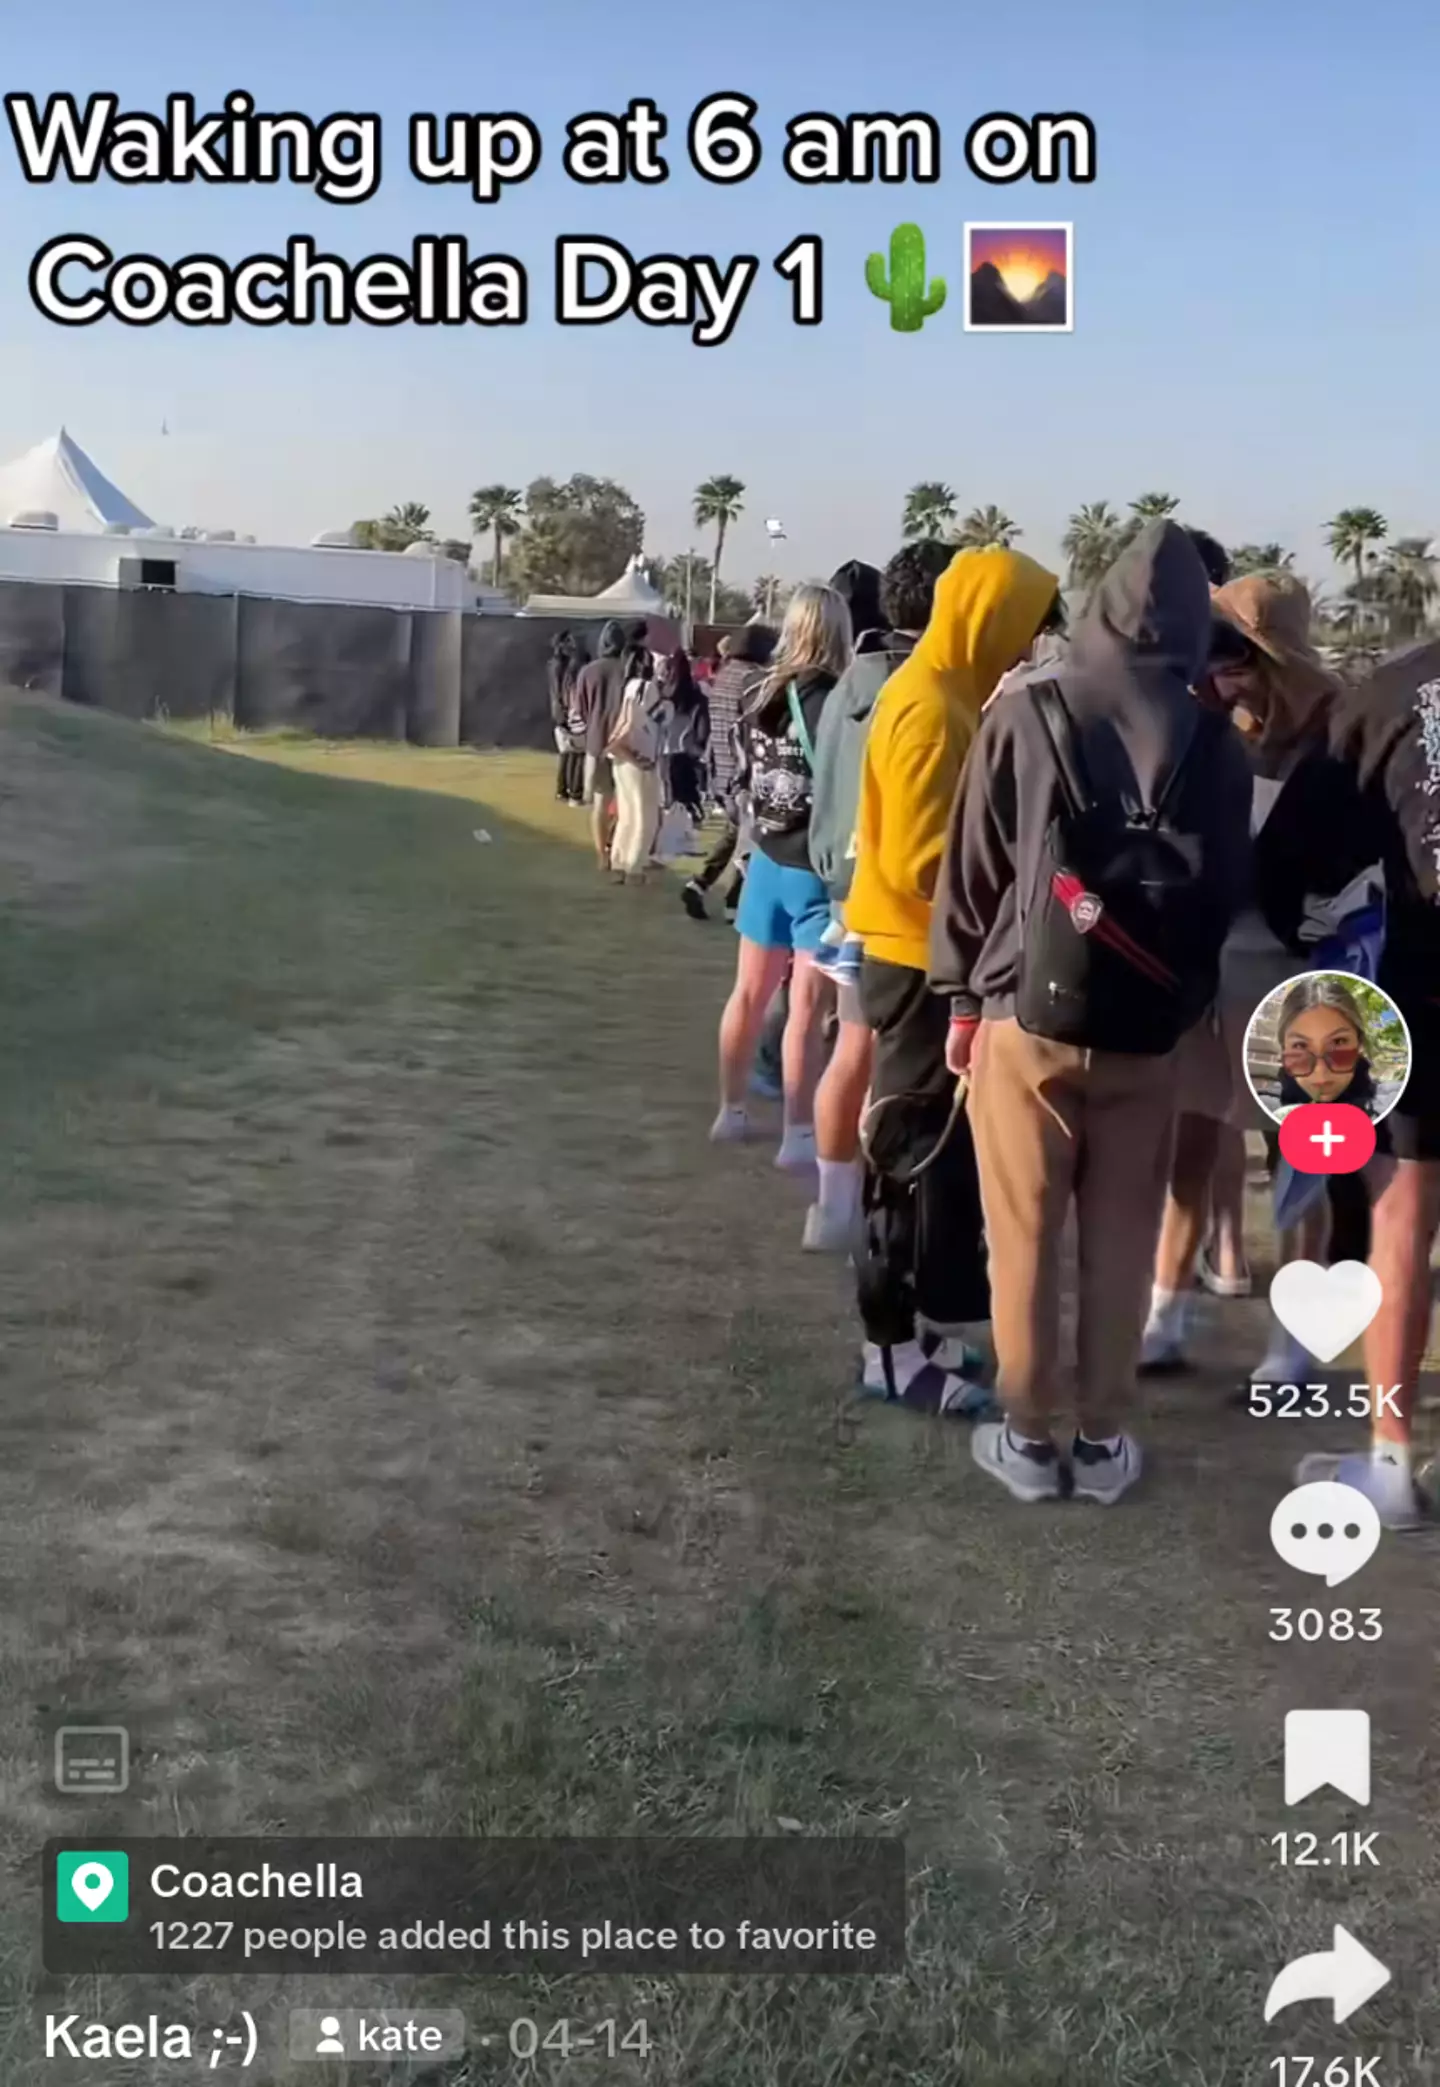 Don't expect to hop in a hot shower at Coachella!